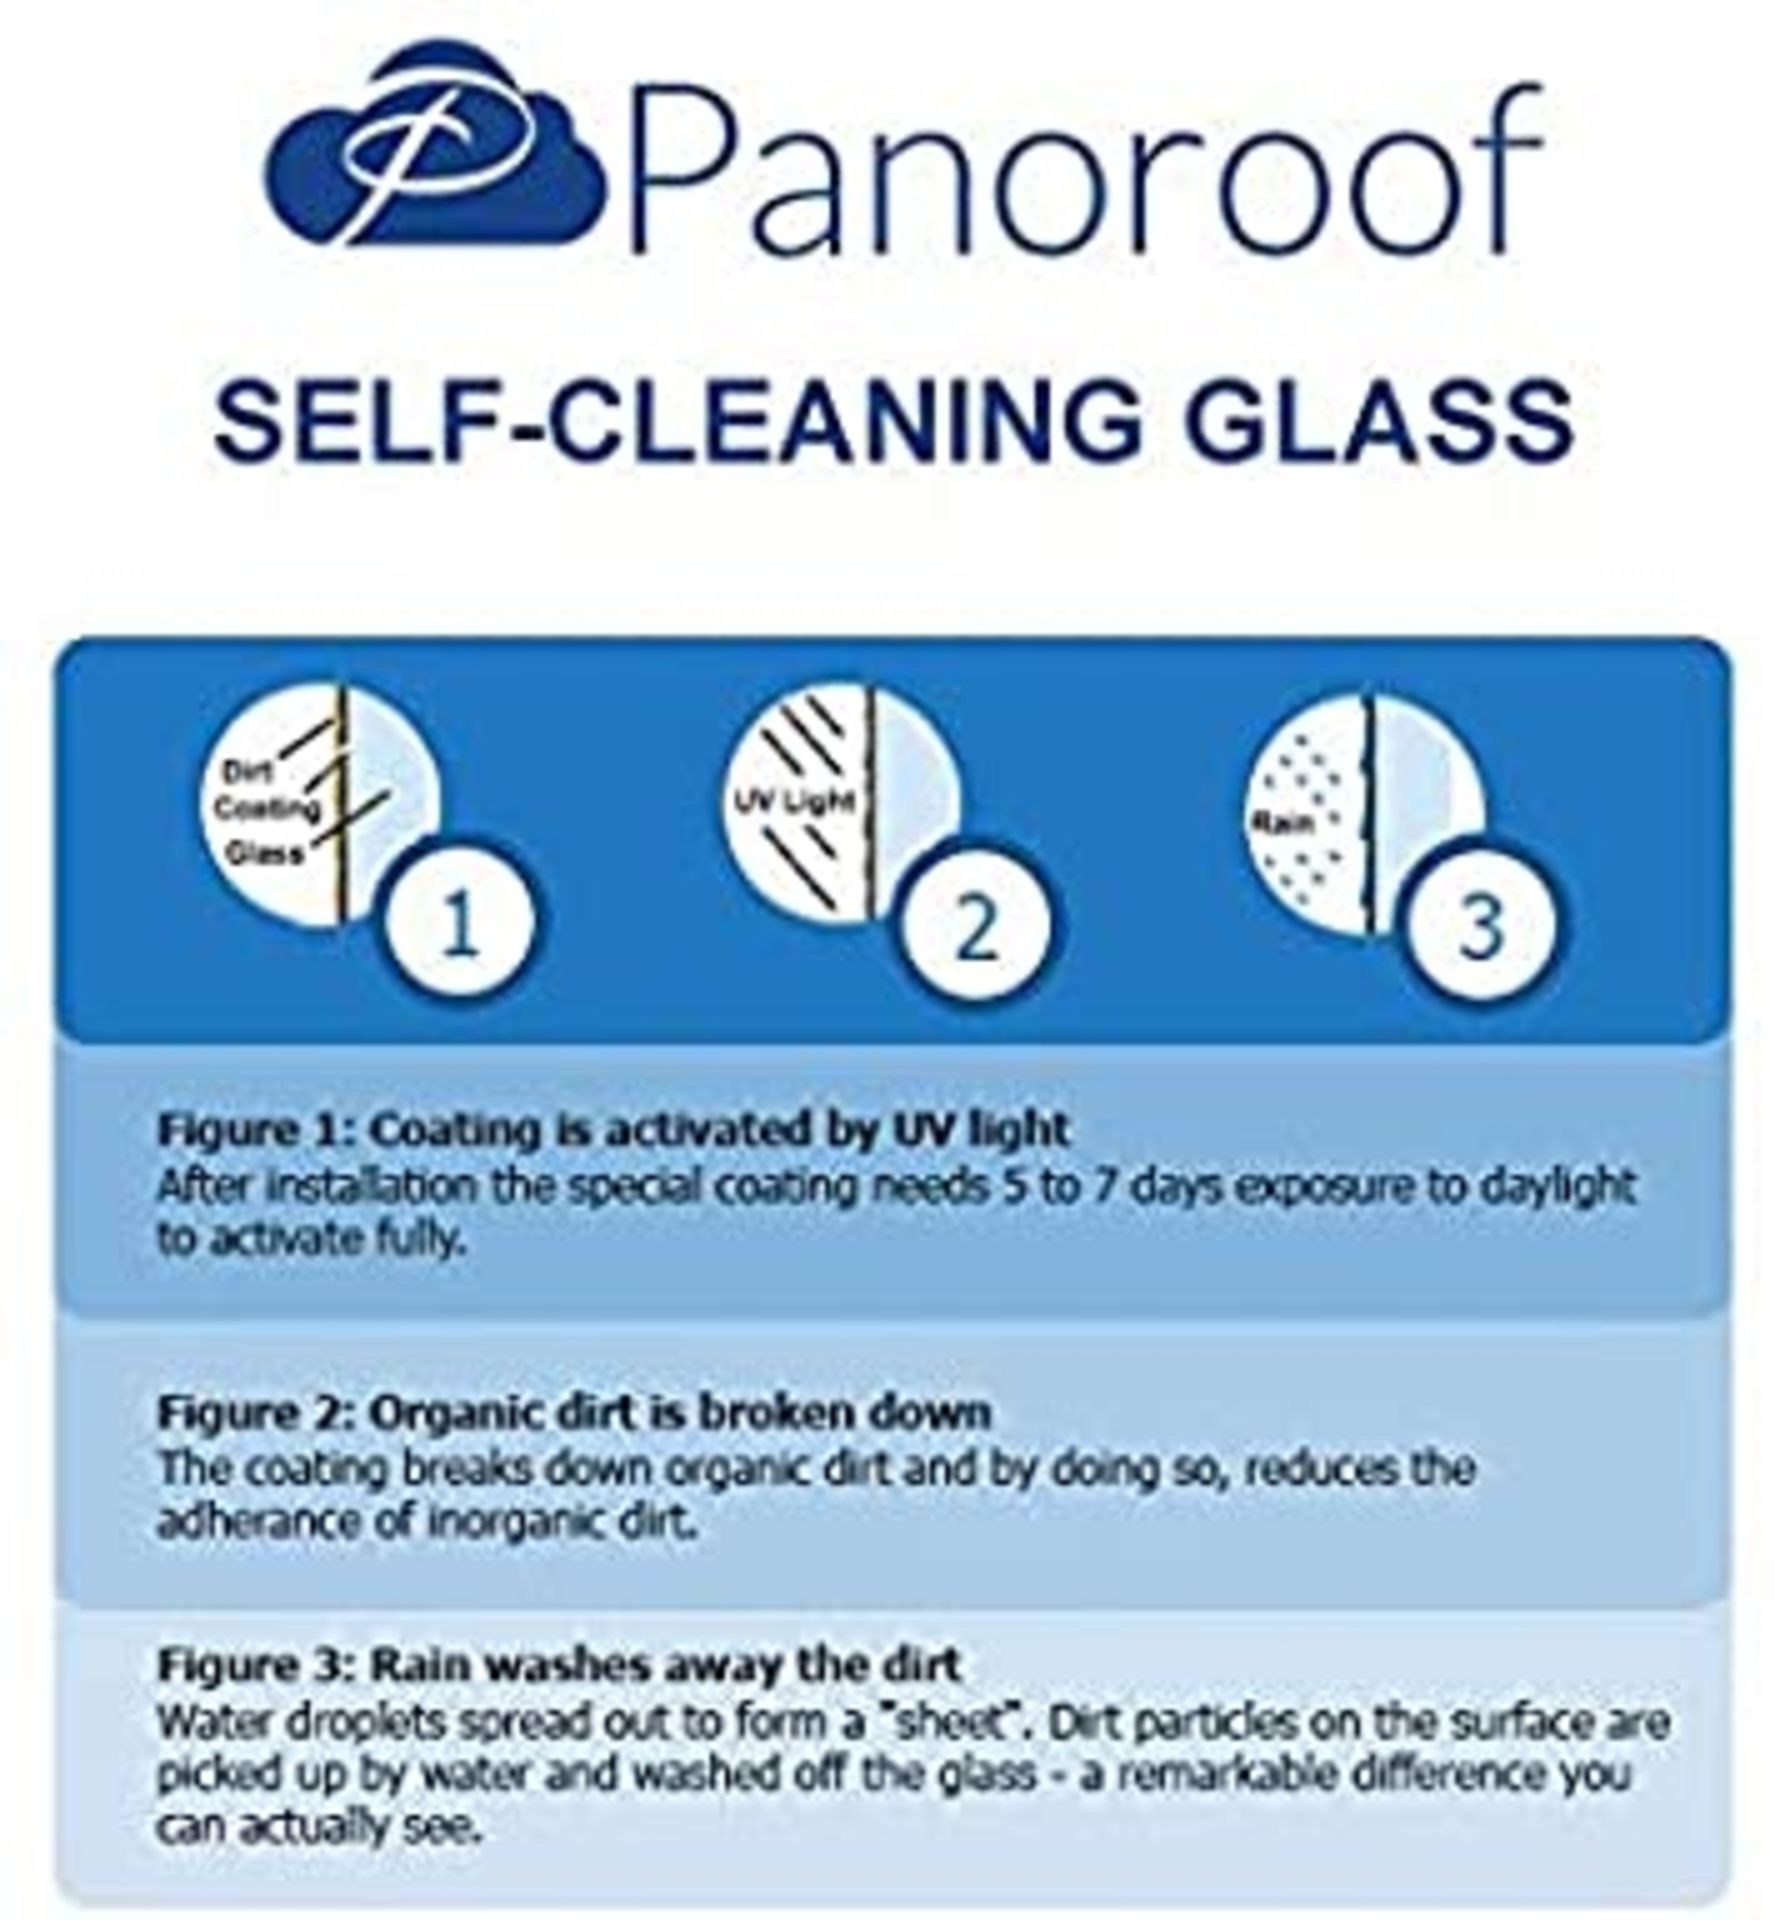 """Panoroof Triple Glazed Self Cleaning 600x900mm (inside Size Visable glass area) Seamless Glass - Image 6 of 6